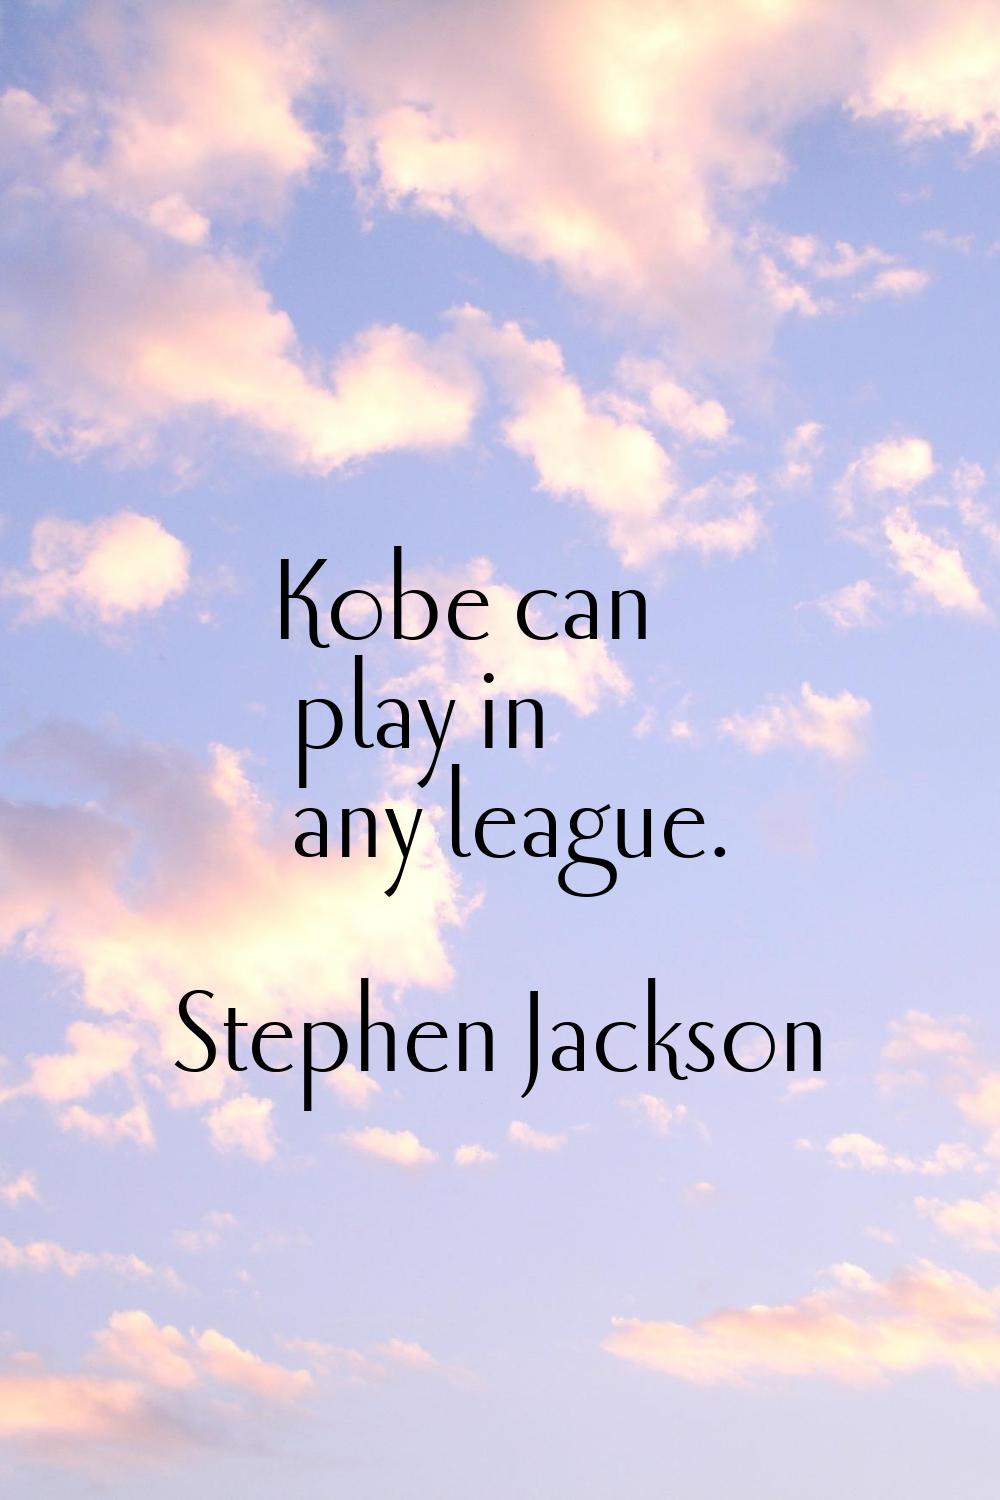 Kobe can play in any league.